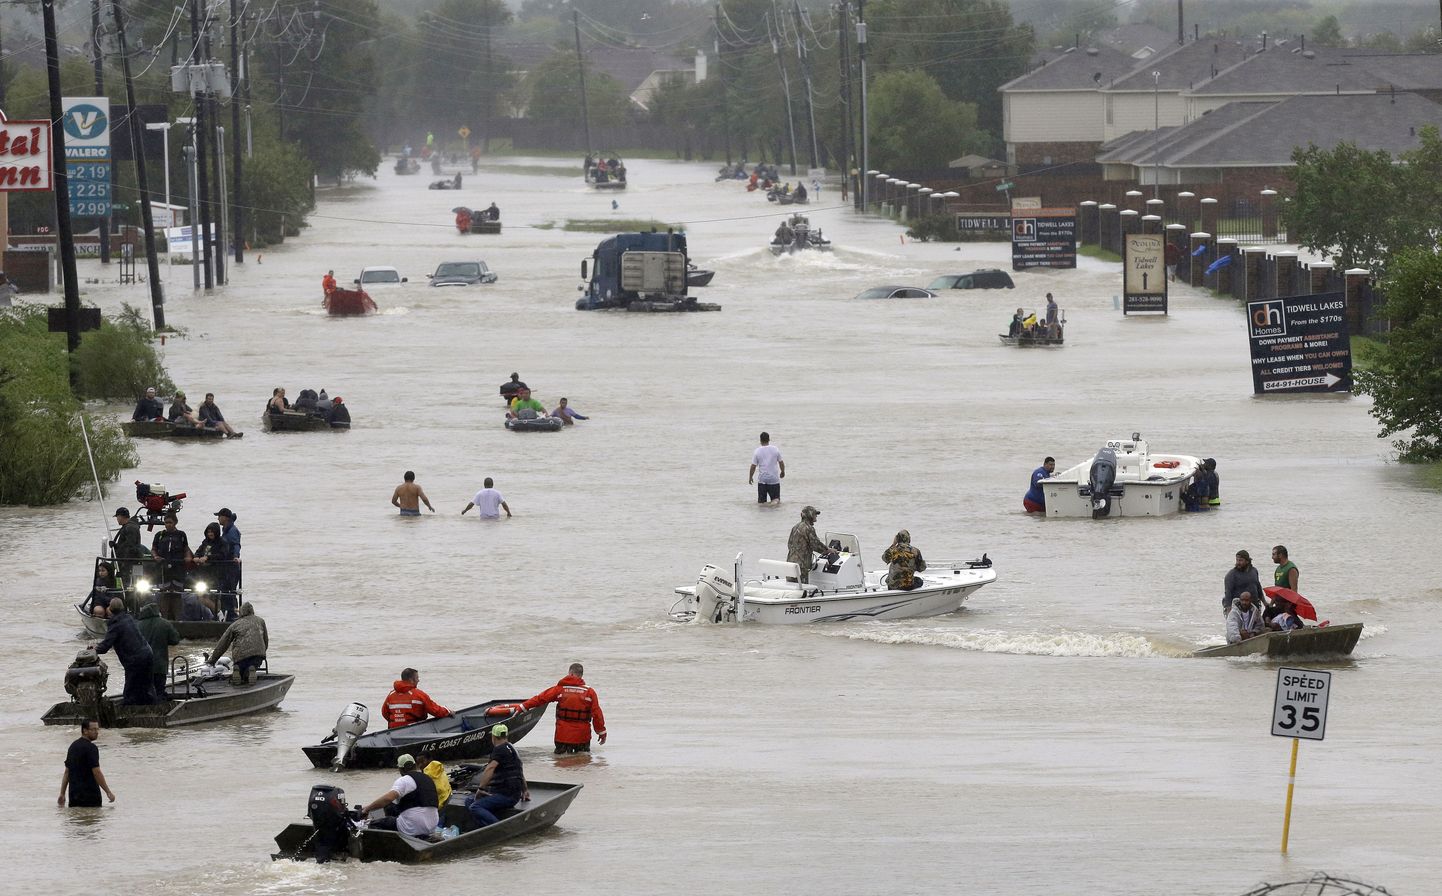 People and rescue boats line a street at the east Sam Houston Tollway as rescues continue from flooding following Tropical Storm Harvey. (Melissa Phillip/Houston Chronicle via AP)